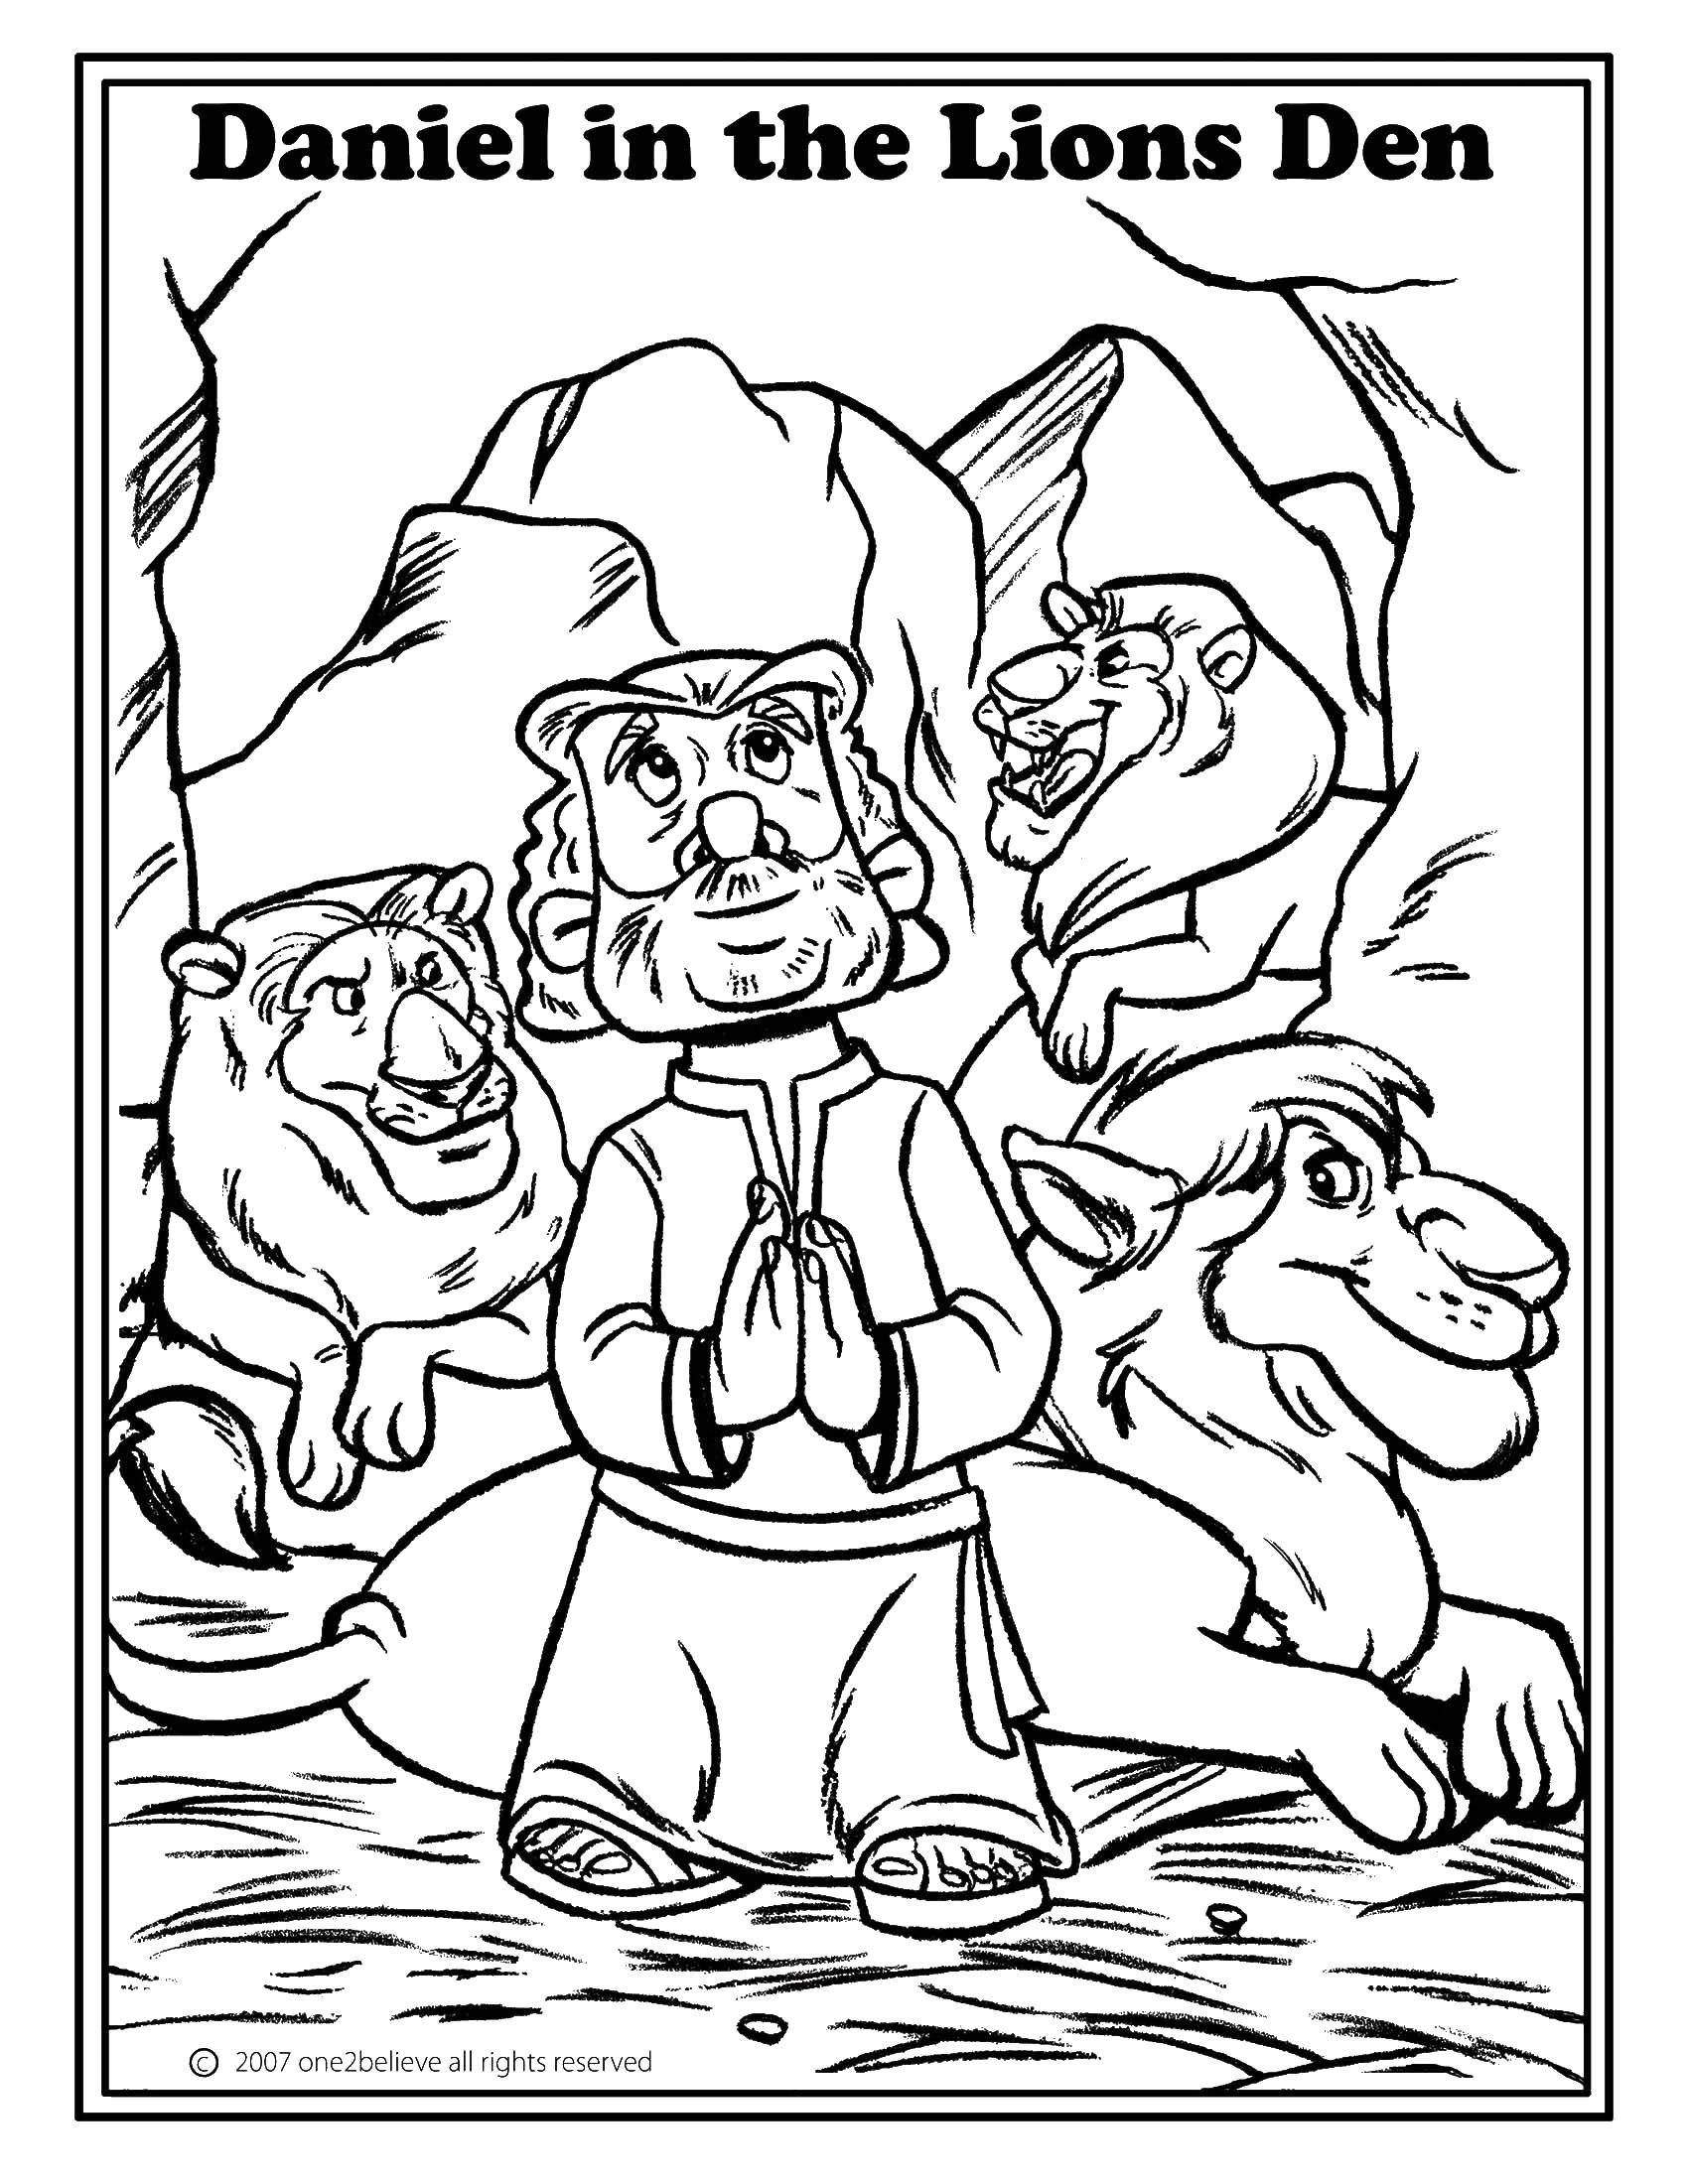 Coloring Daniel and the lions. Category the Bible. Tags:  the Bible, Jesus.